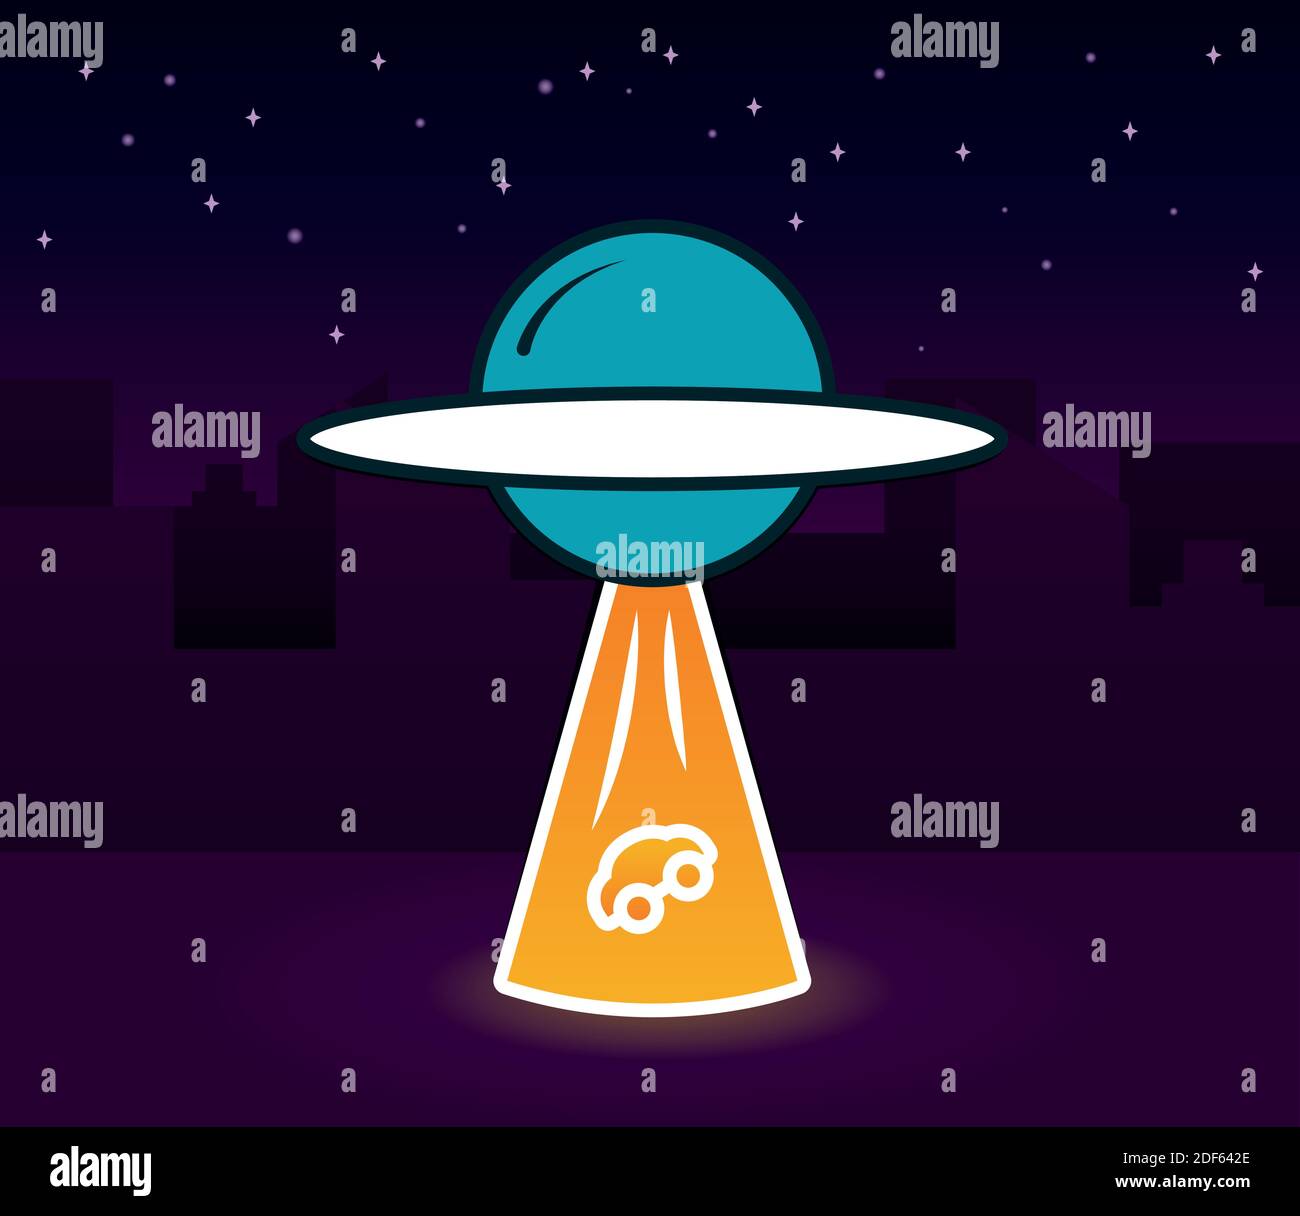 Ufo Alien Abduction a car over night background, colorful design, vector illustration Stock Vector